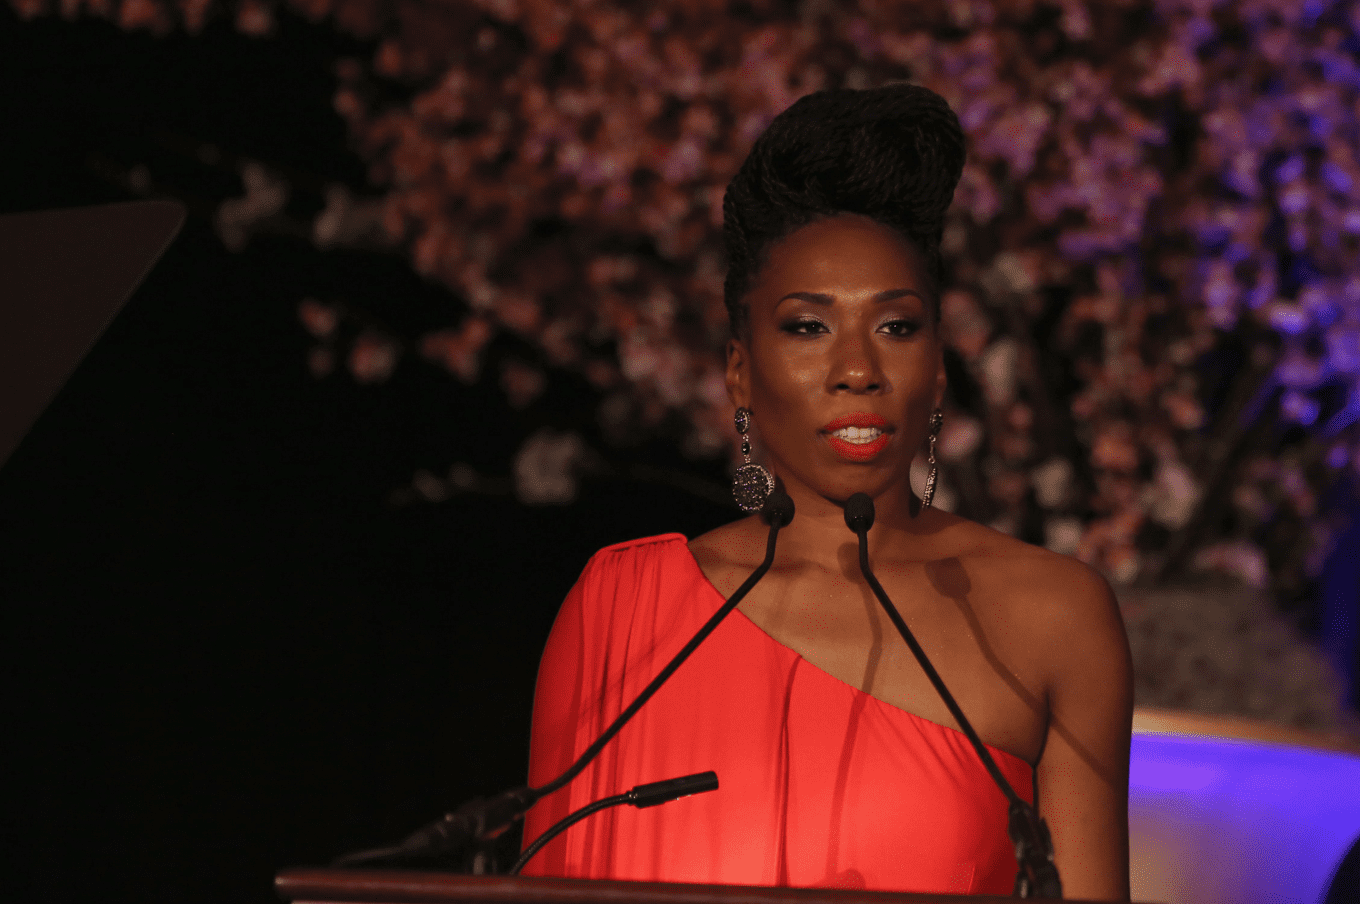 Brandi Harvey stands behind a podium during her speech at the "Steve & Marjorie Harvey Foundation Gala" on May 3, 2014, in Chicago, Illinois. | Source: Getty Images